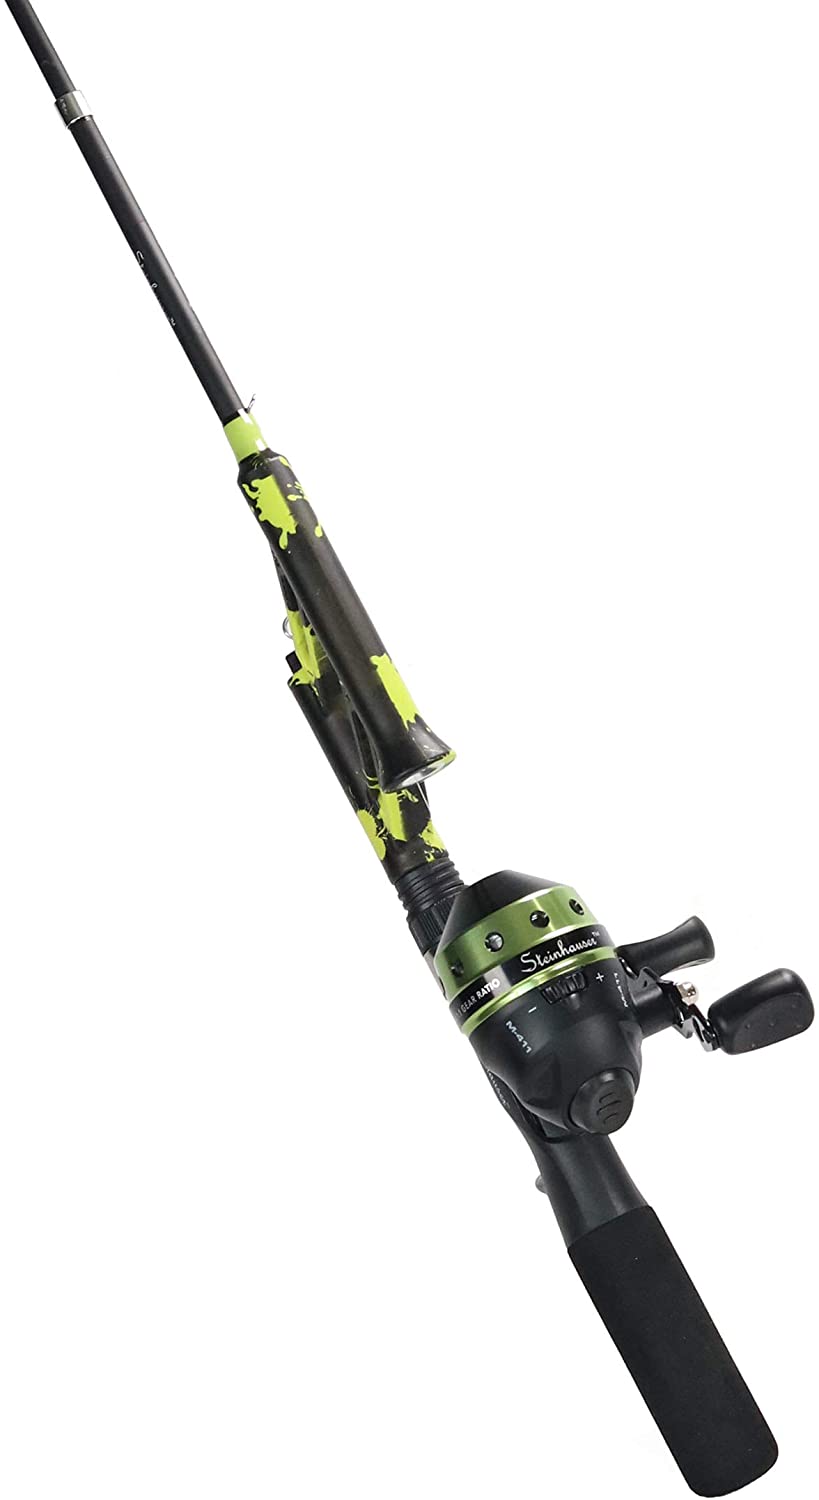 Syfer Spinning Fishing Rod and Reel Combos Portable Telescopic